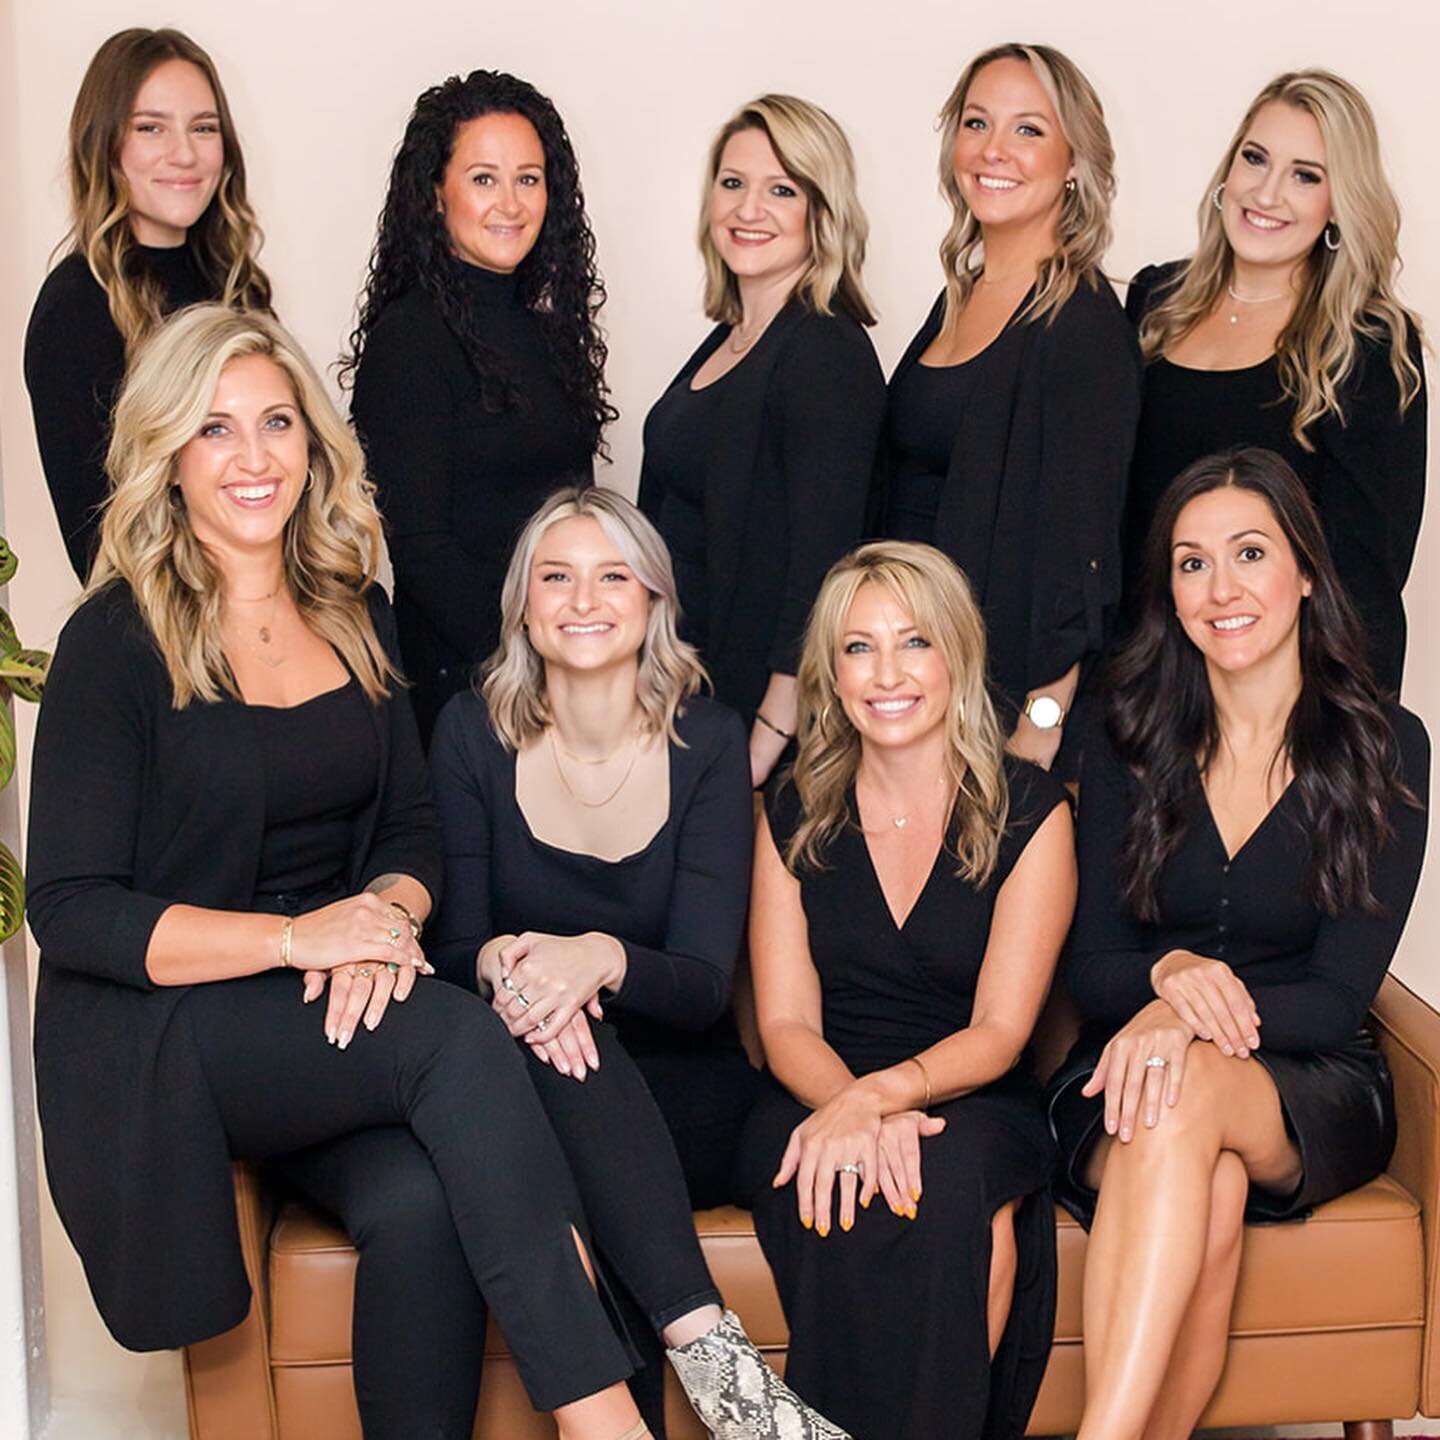 MEET OUR TEAM! ✂️✨
Finally, our incredible hair stylists. Combined, these ladies have over 75 years of experience!

BECCA &bull; Creative Director. Becca does so much for our salon! She has grown as a leader over the years and is an incredible asset 